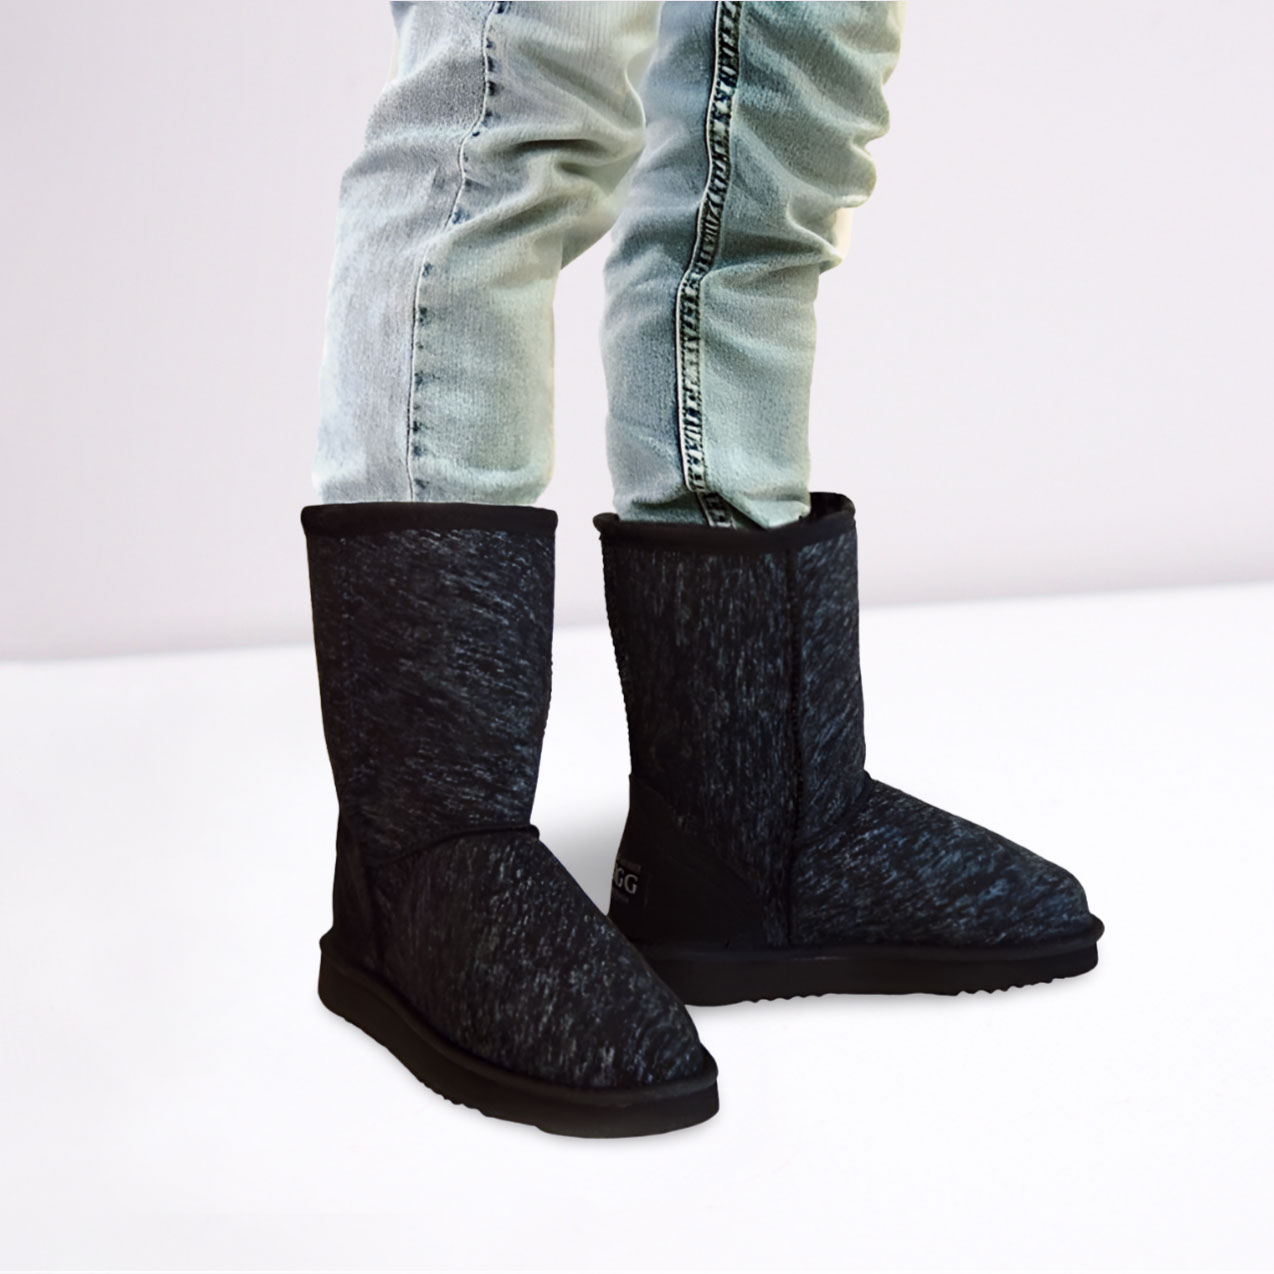 Deluxe Ugg Boots for men